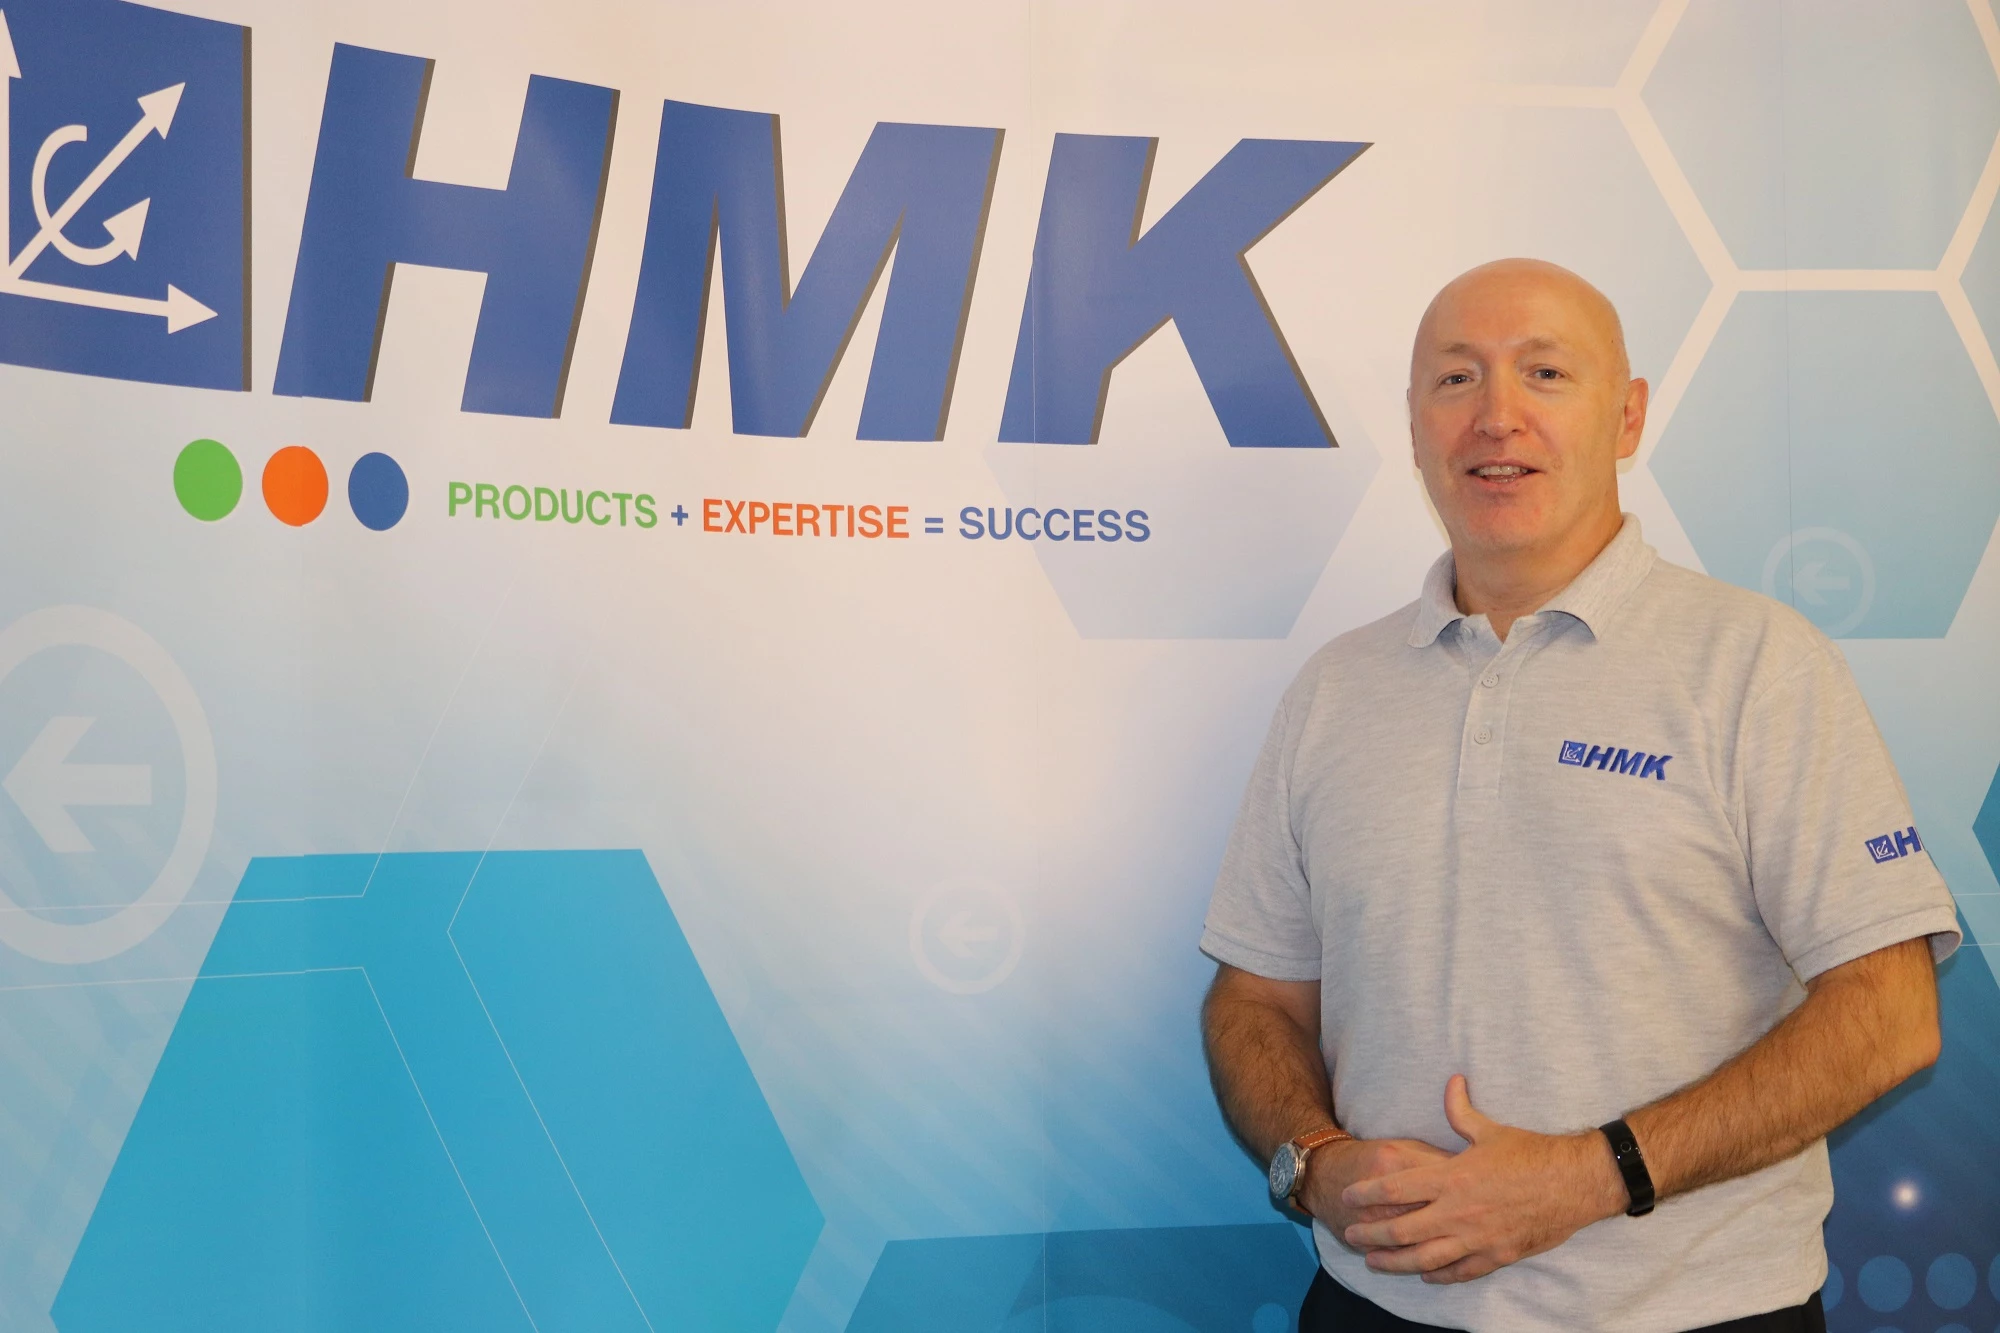 Gary Kitchin, Managing Director at HMK Automation Group, which has supported the Ventilator Challenge UK.